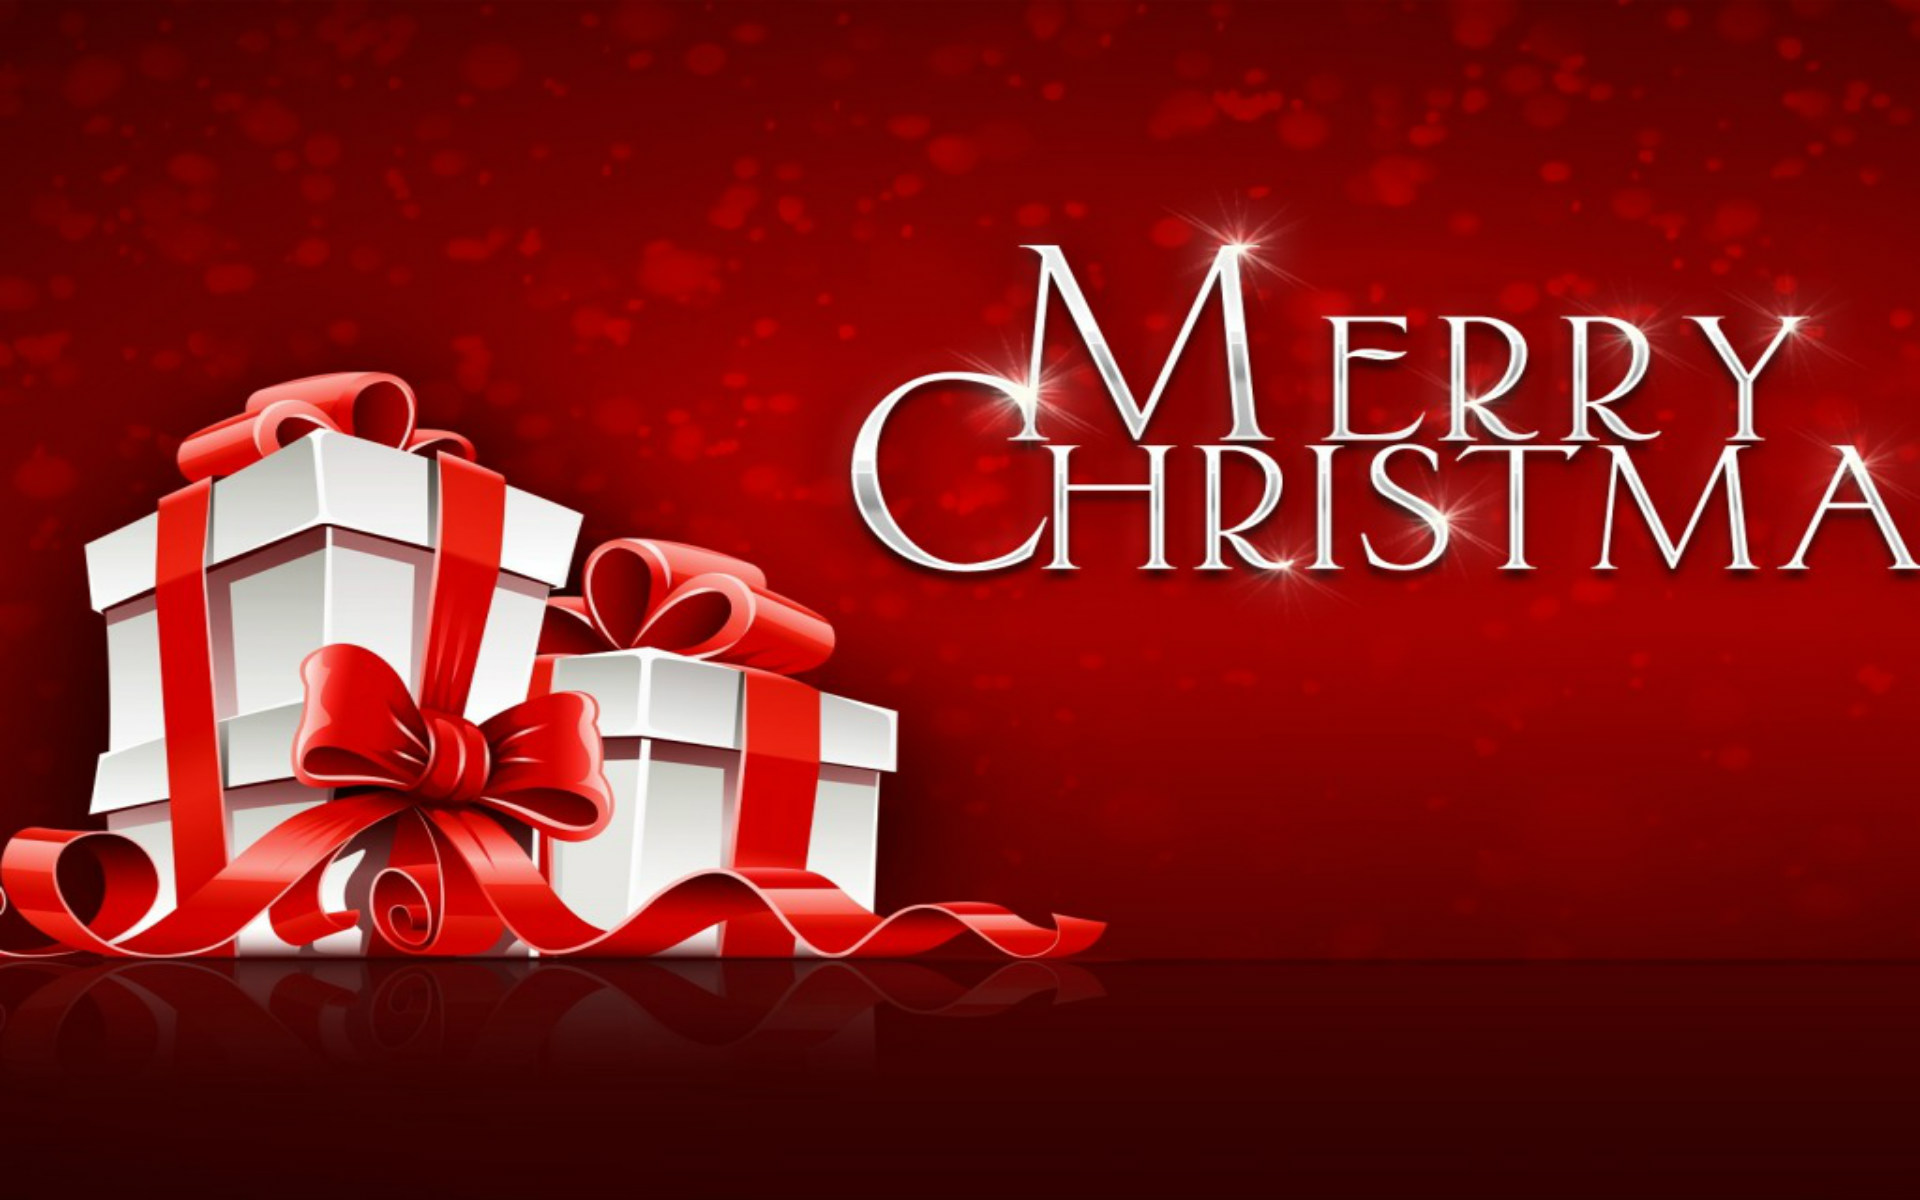 Merry Christmas - Gifts from Santa Claus with love